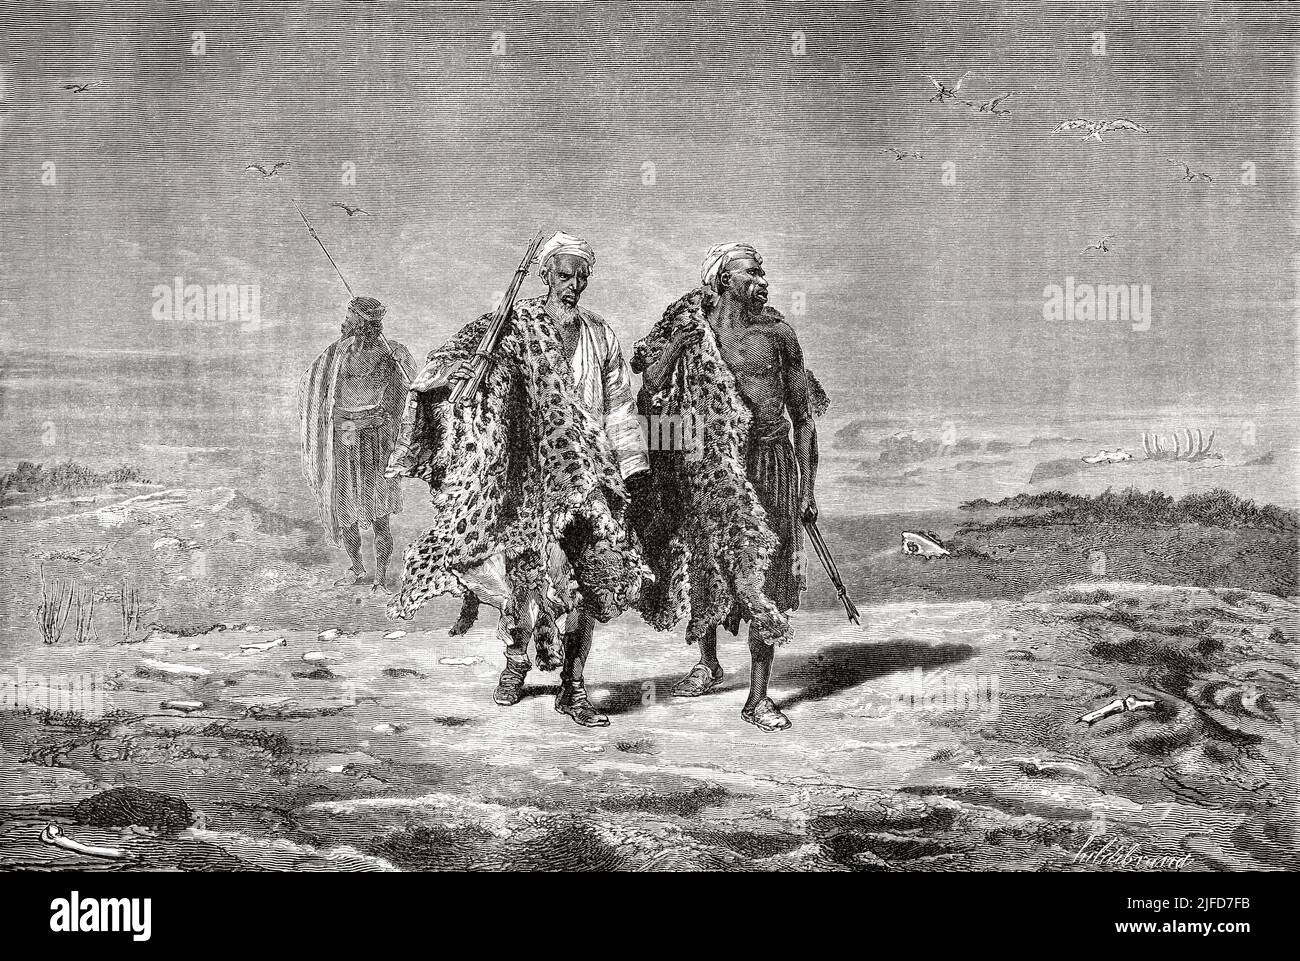 Arab skin traders, Iraq. Journey to Babylon by Guillaume Lejean 1866 from Le Tour du Monde 1867 Stock Photo